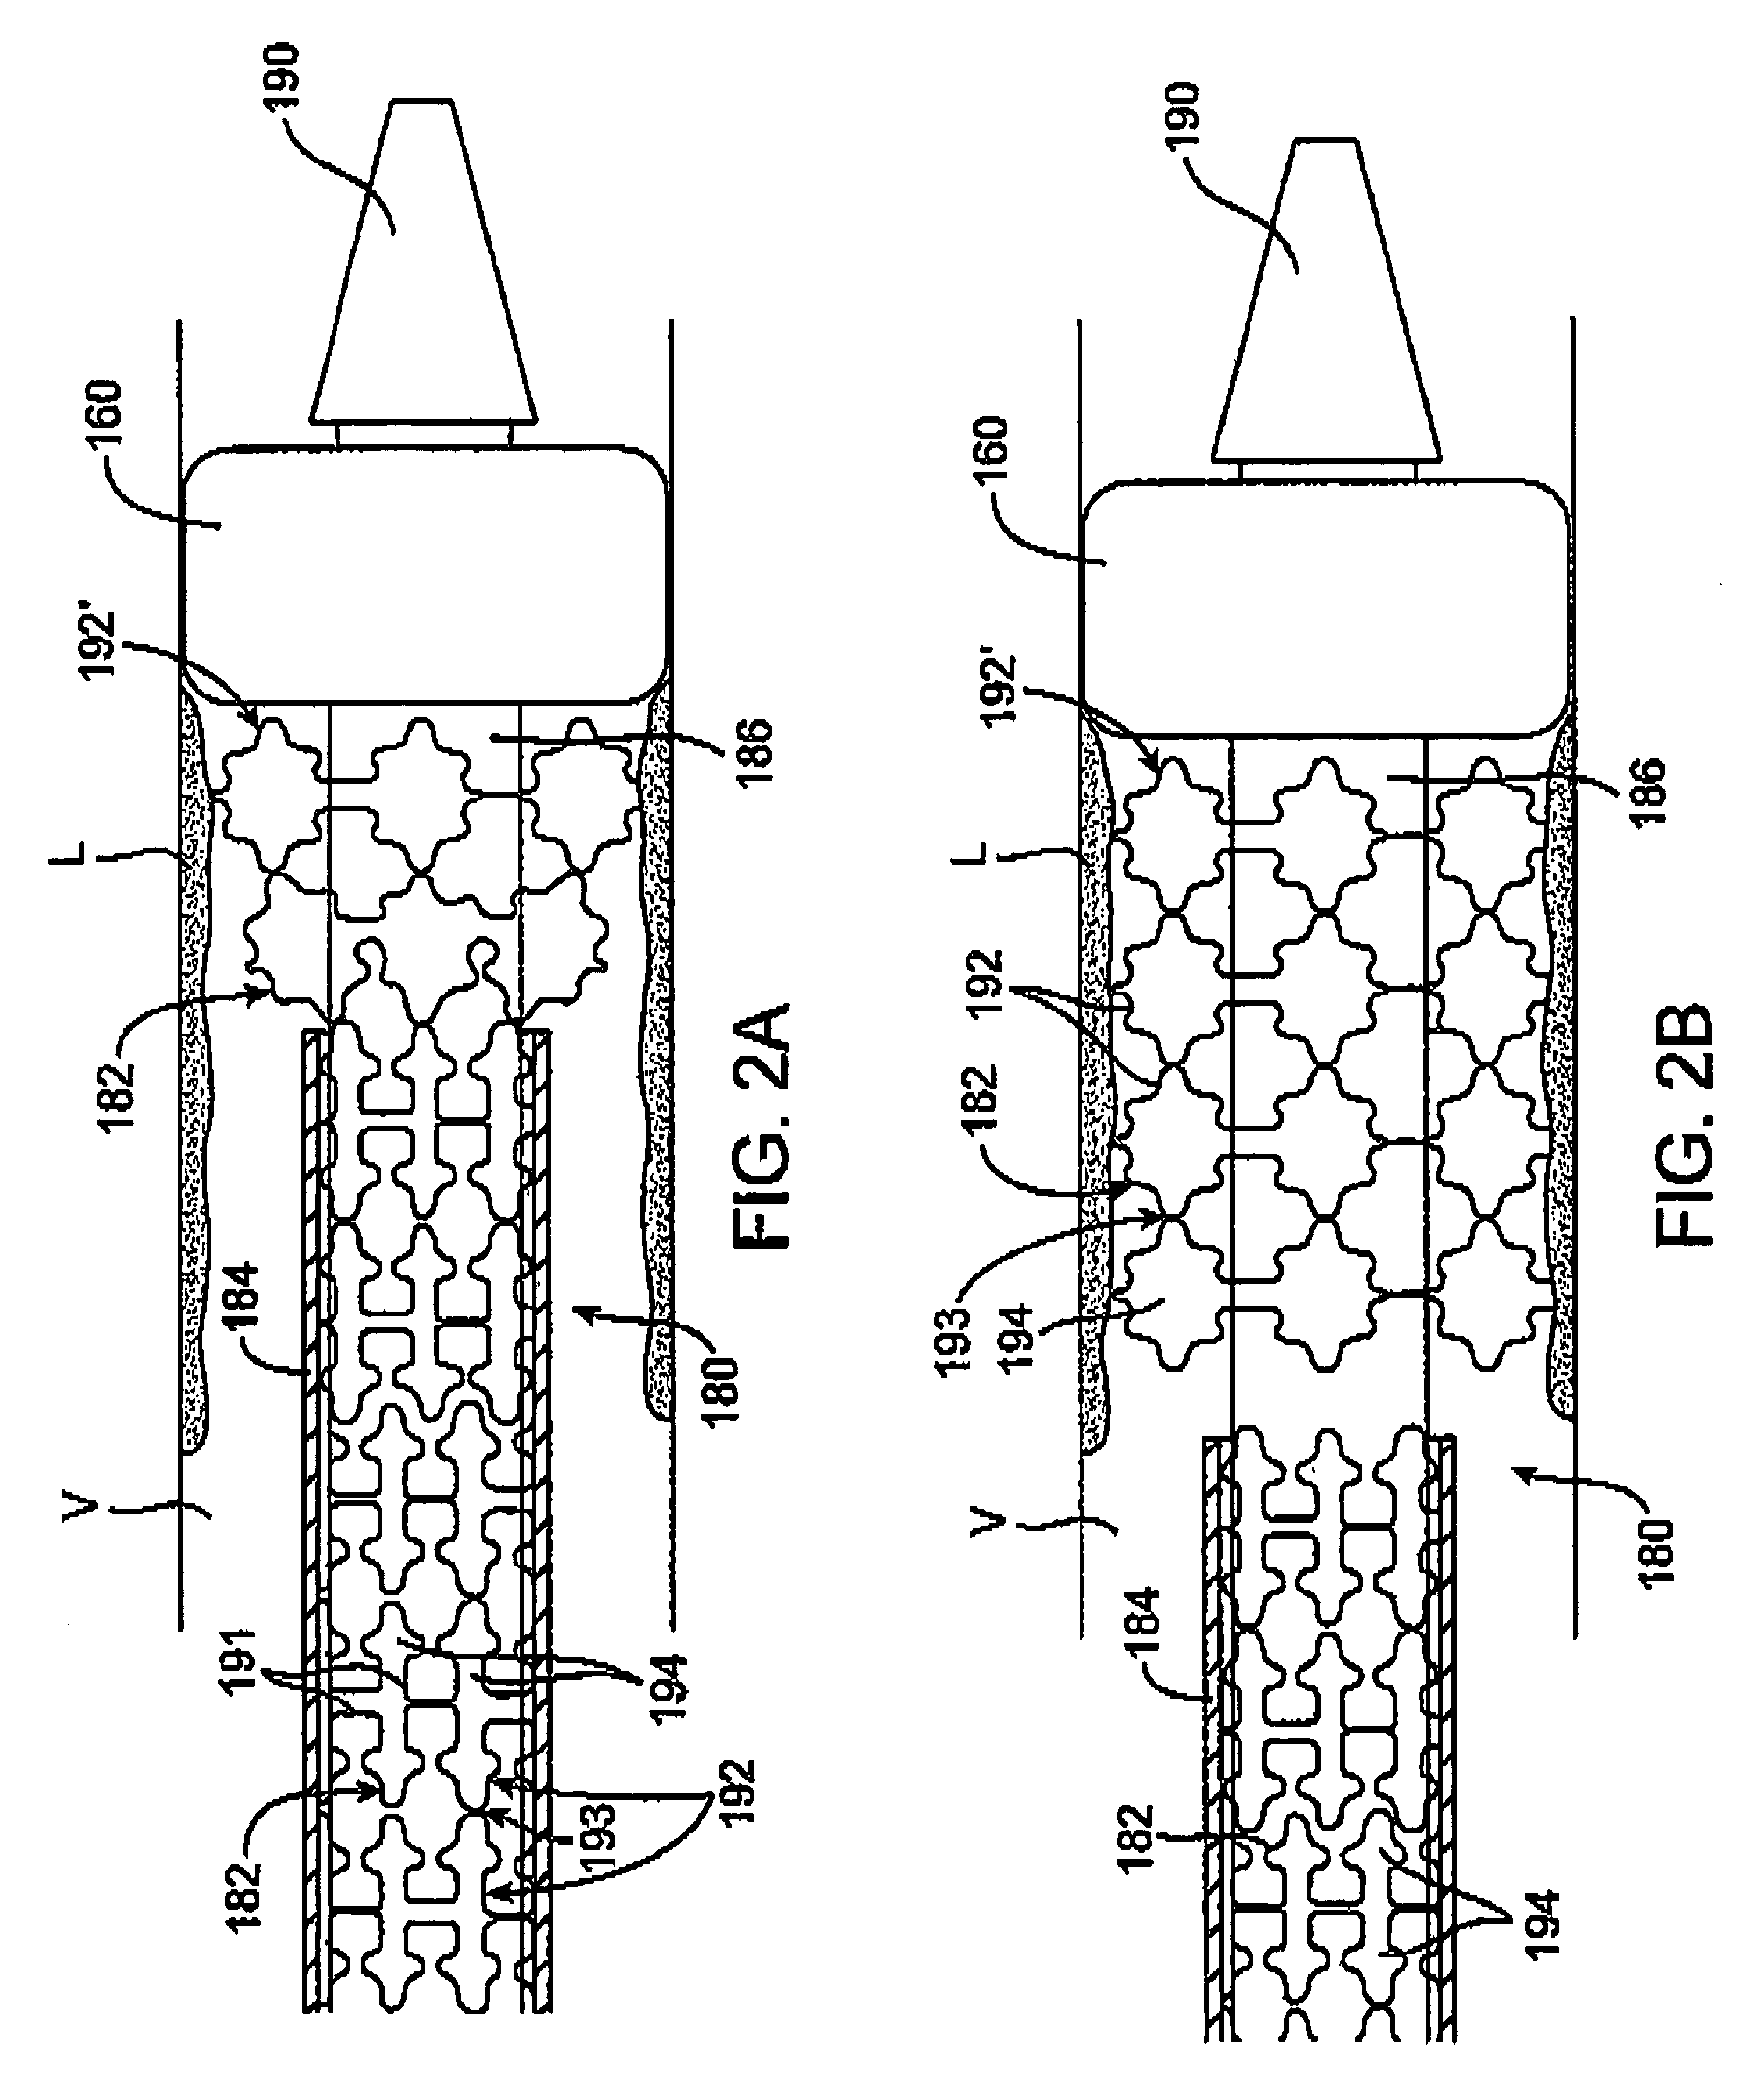 Custom-length self-expanding stent delivery systems with stent bumpers